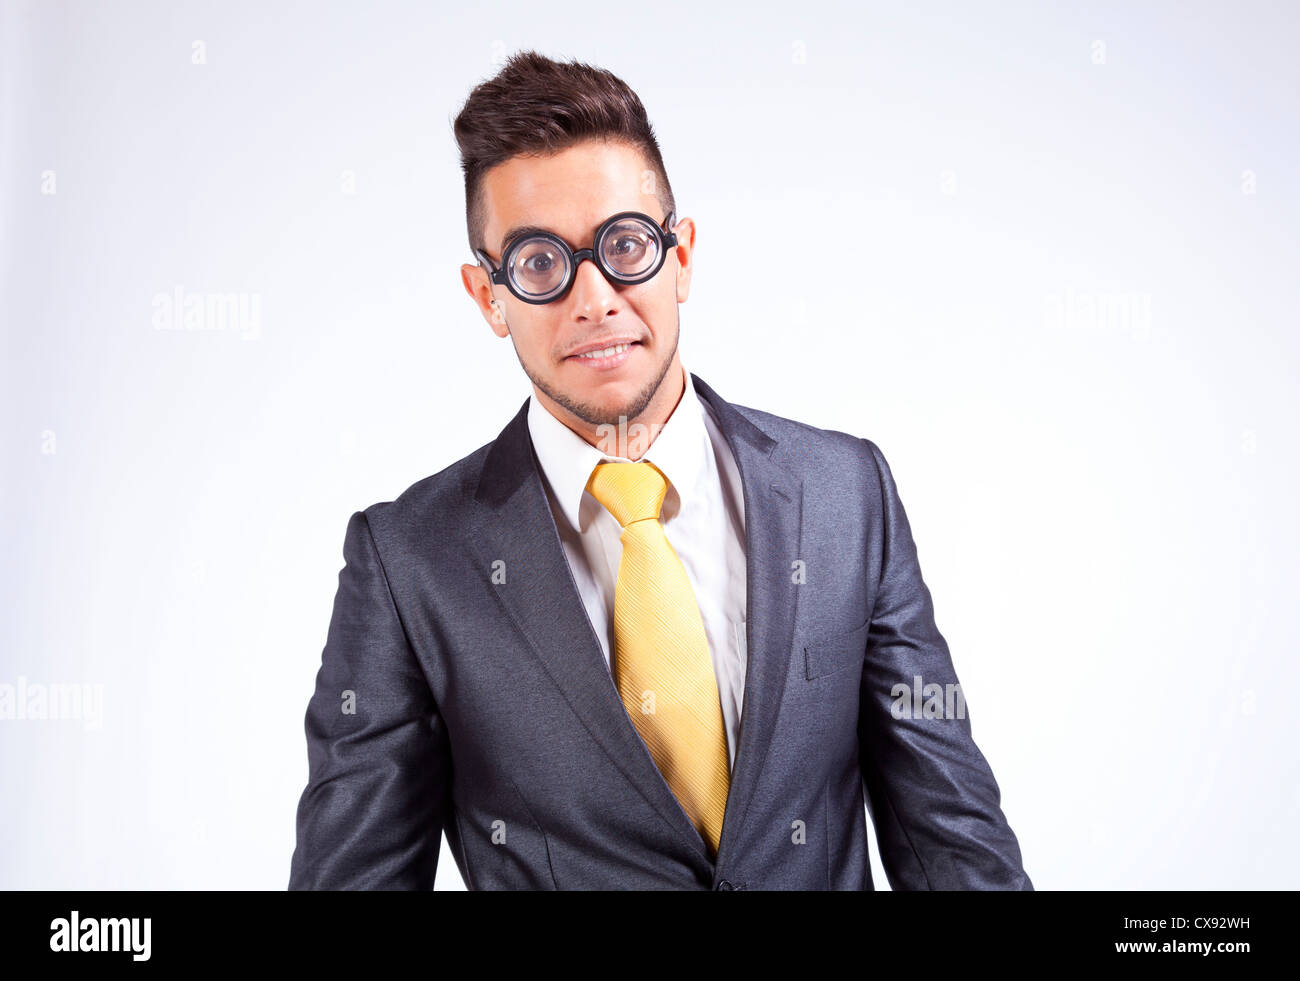 HAppy nerd businessman with funny glasses Stock Photo